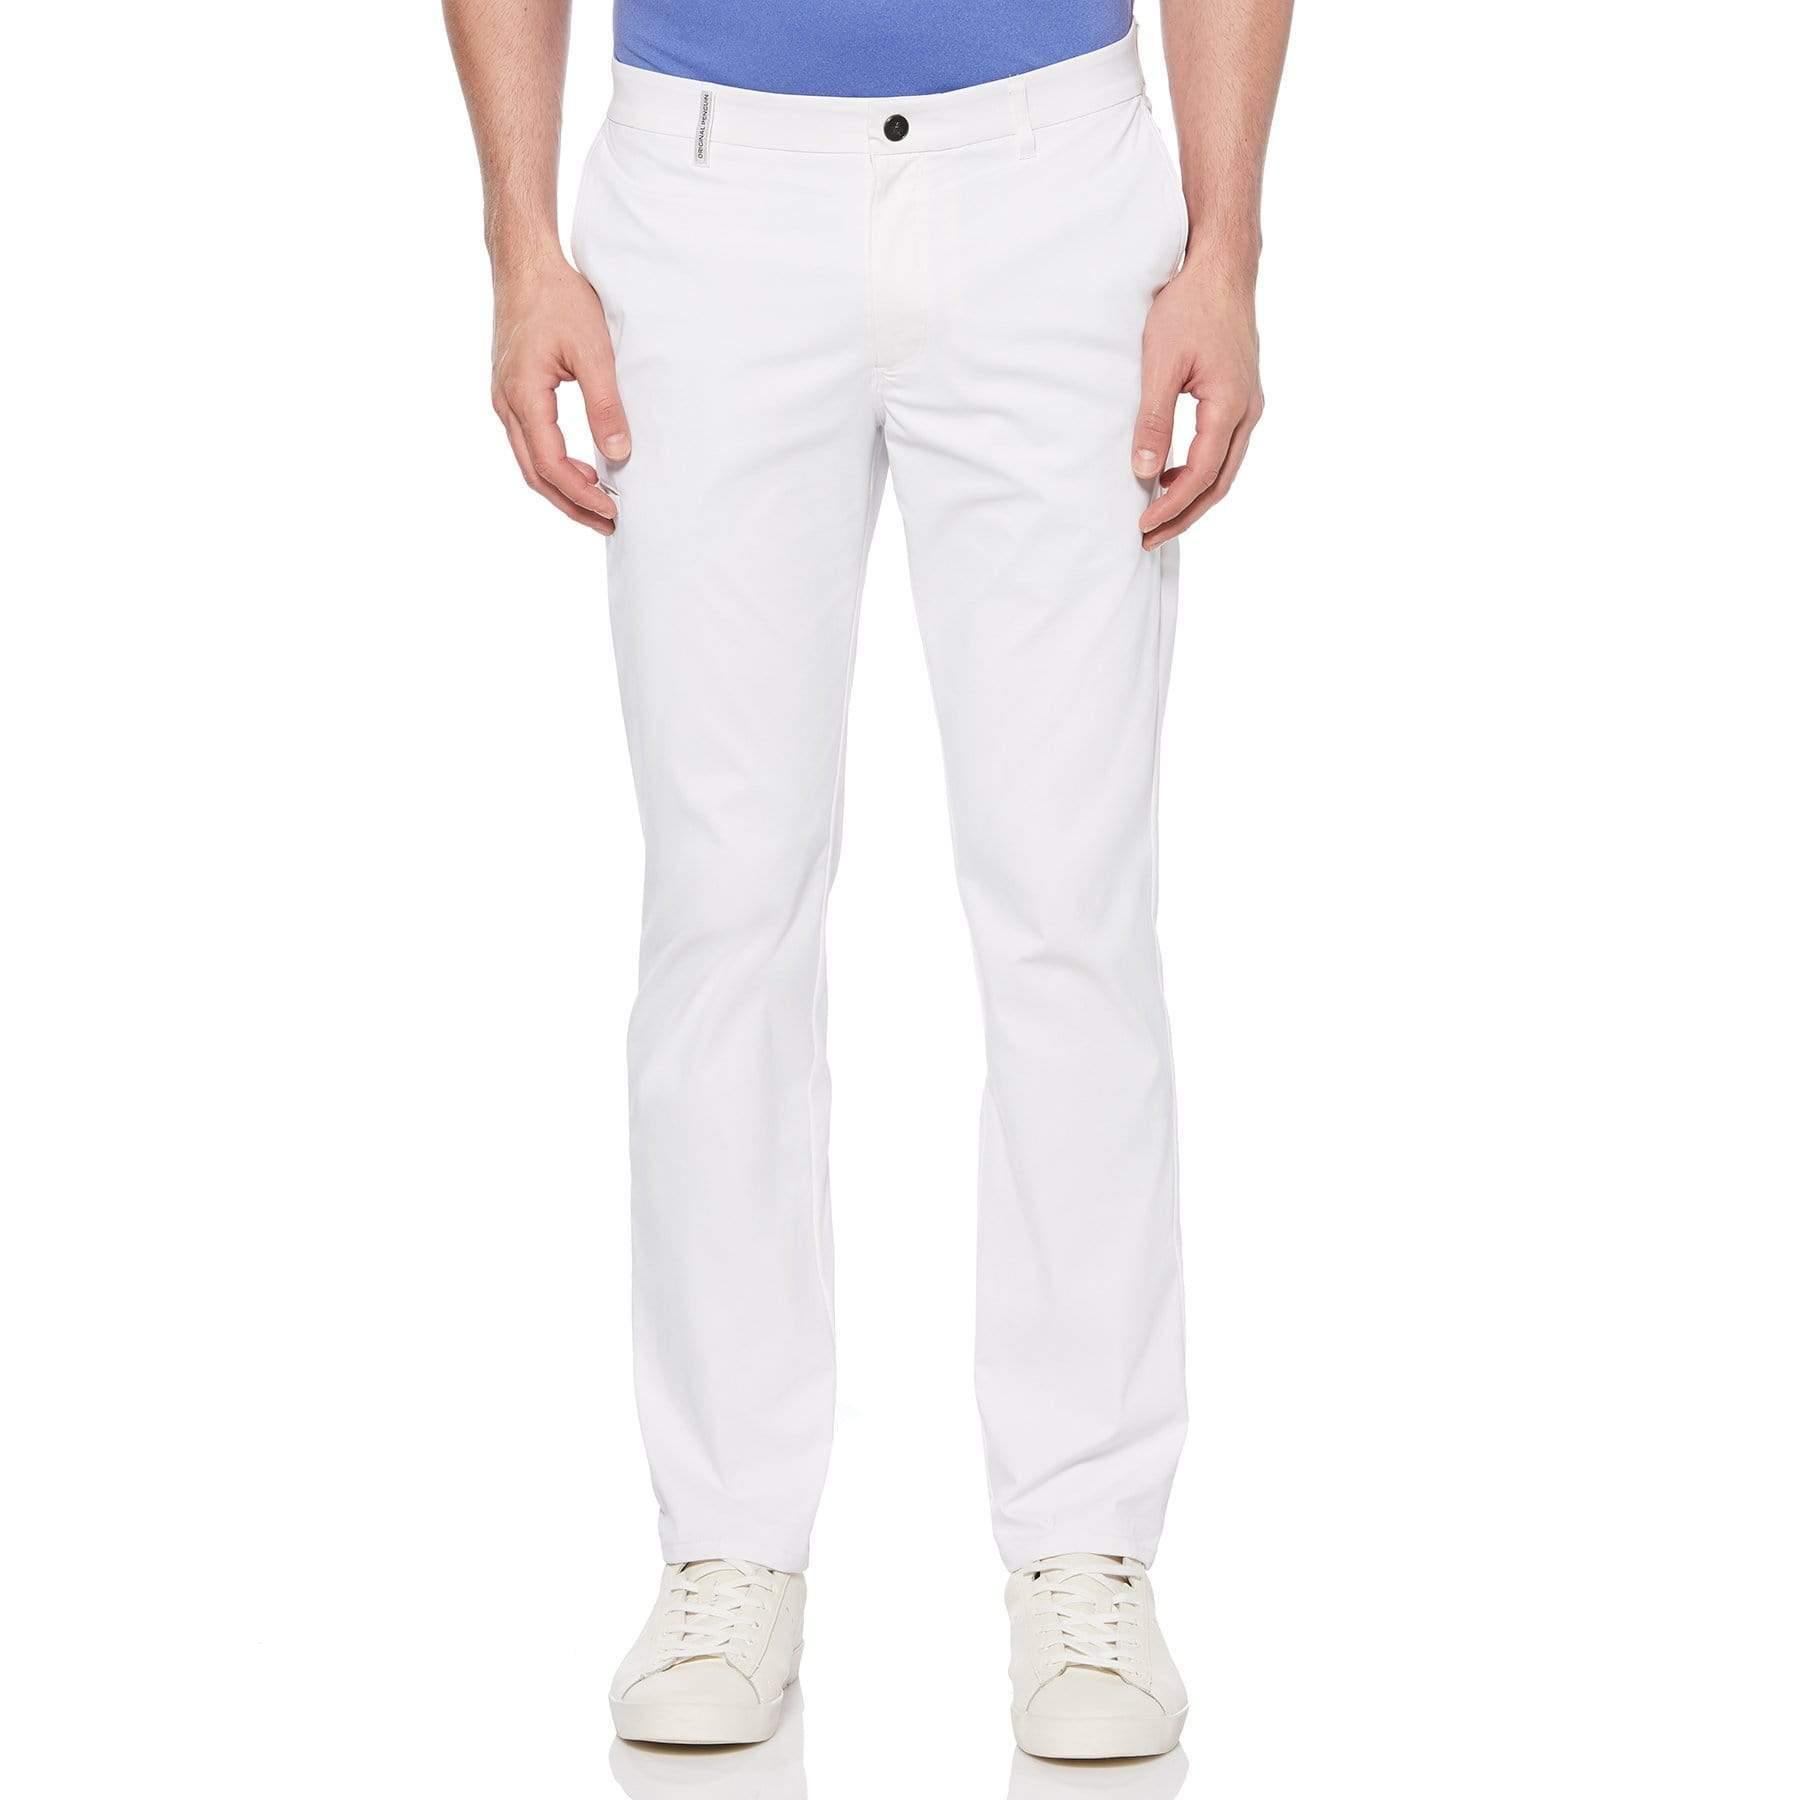 Original Penguin Synthetic All Day Every Day Golf Pant in Bright White ...